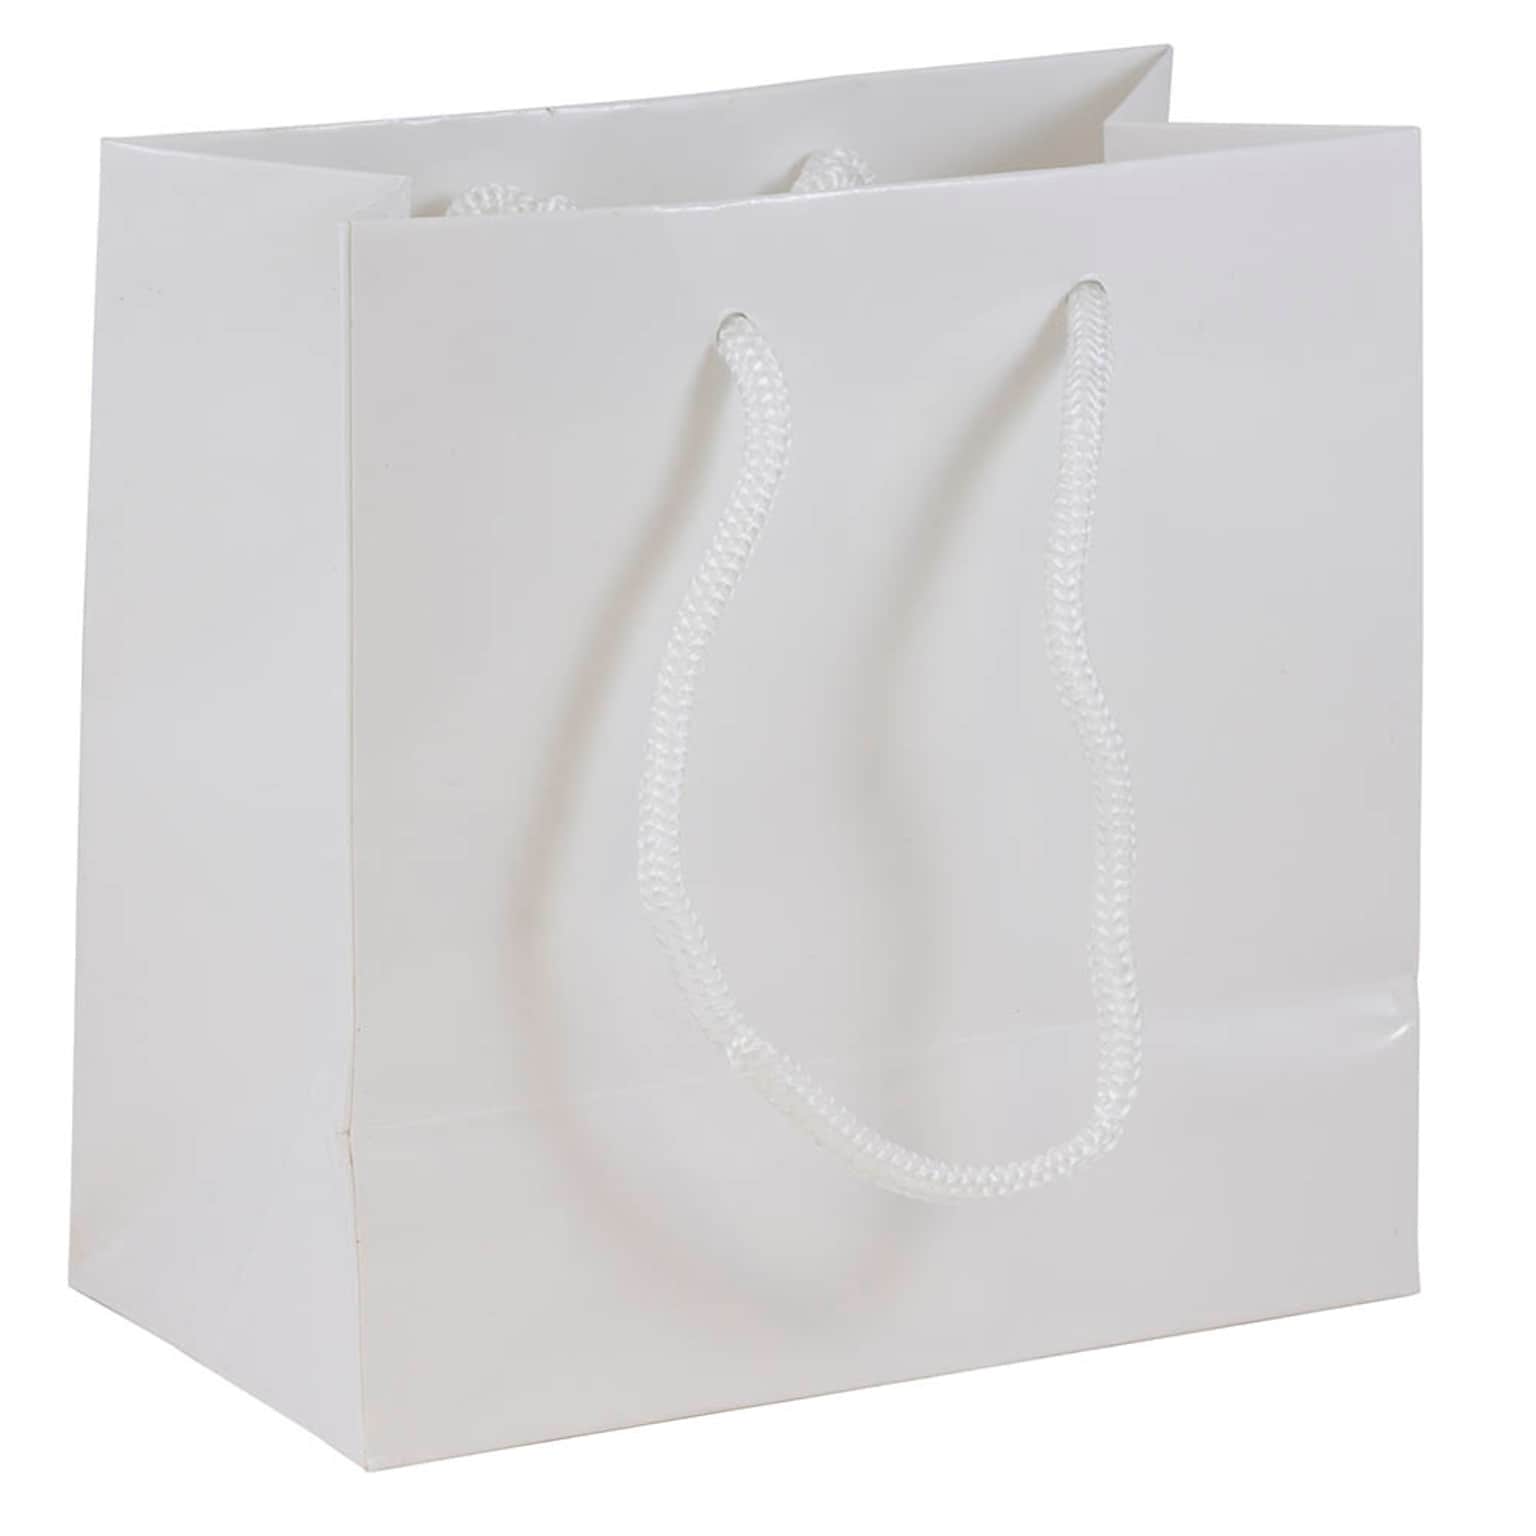 JAM PAPER Gift Bags with Rope Handles, Small Square, 6 1/2 x 6 1/2 x 3 1/2, White Glossy, Bulk 100 Bags/Pack (896GLWH100)